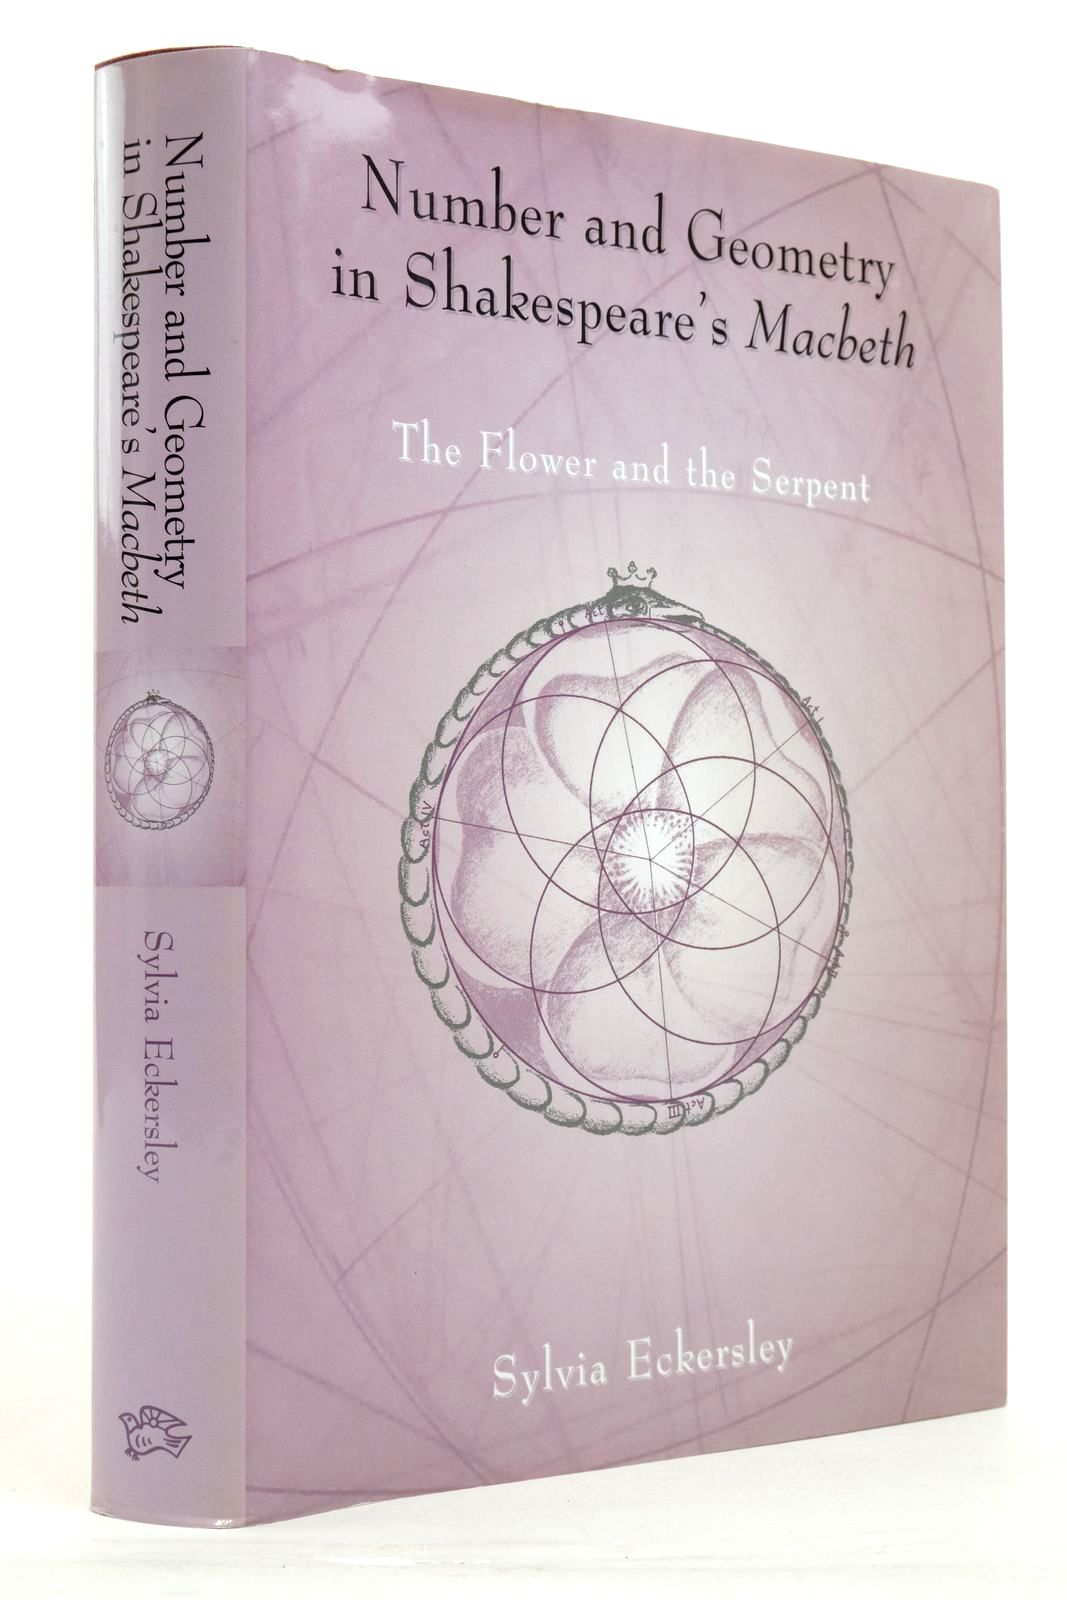 Photo of NUMBER AND GEOMETRY IN SHAKESPEARE'S MACBETH: THE FLOWER AND THE SERPENT written by Eckersley, Sylvia published by Floris Books (STOCK CODE: 2137789)  for sale by Stella & Rose's Books